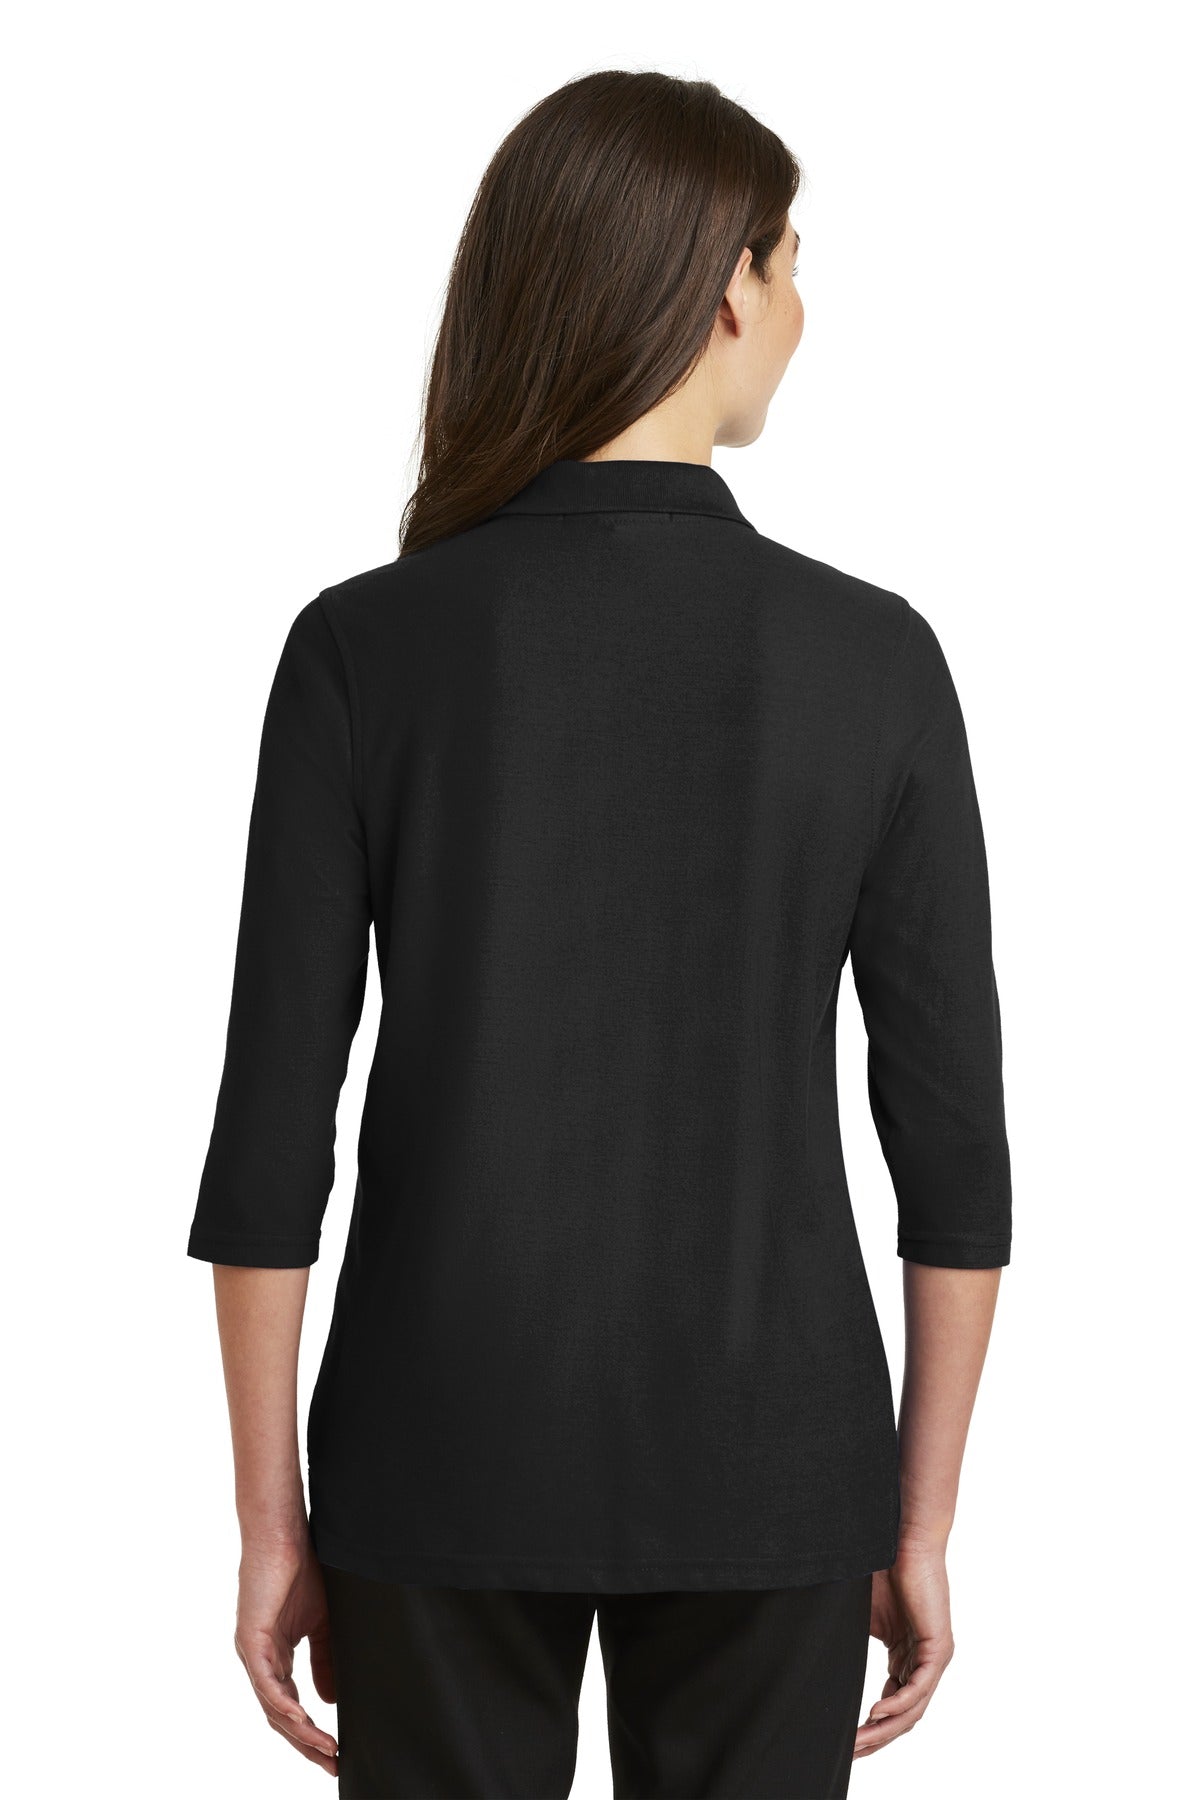 Ladies Silk Touch™ 3/4-Sleeve Polo. L562